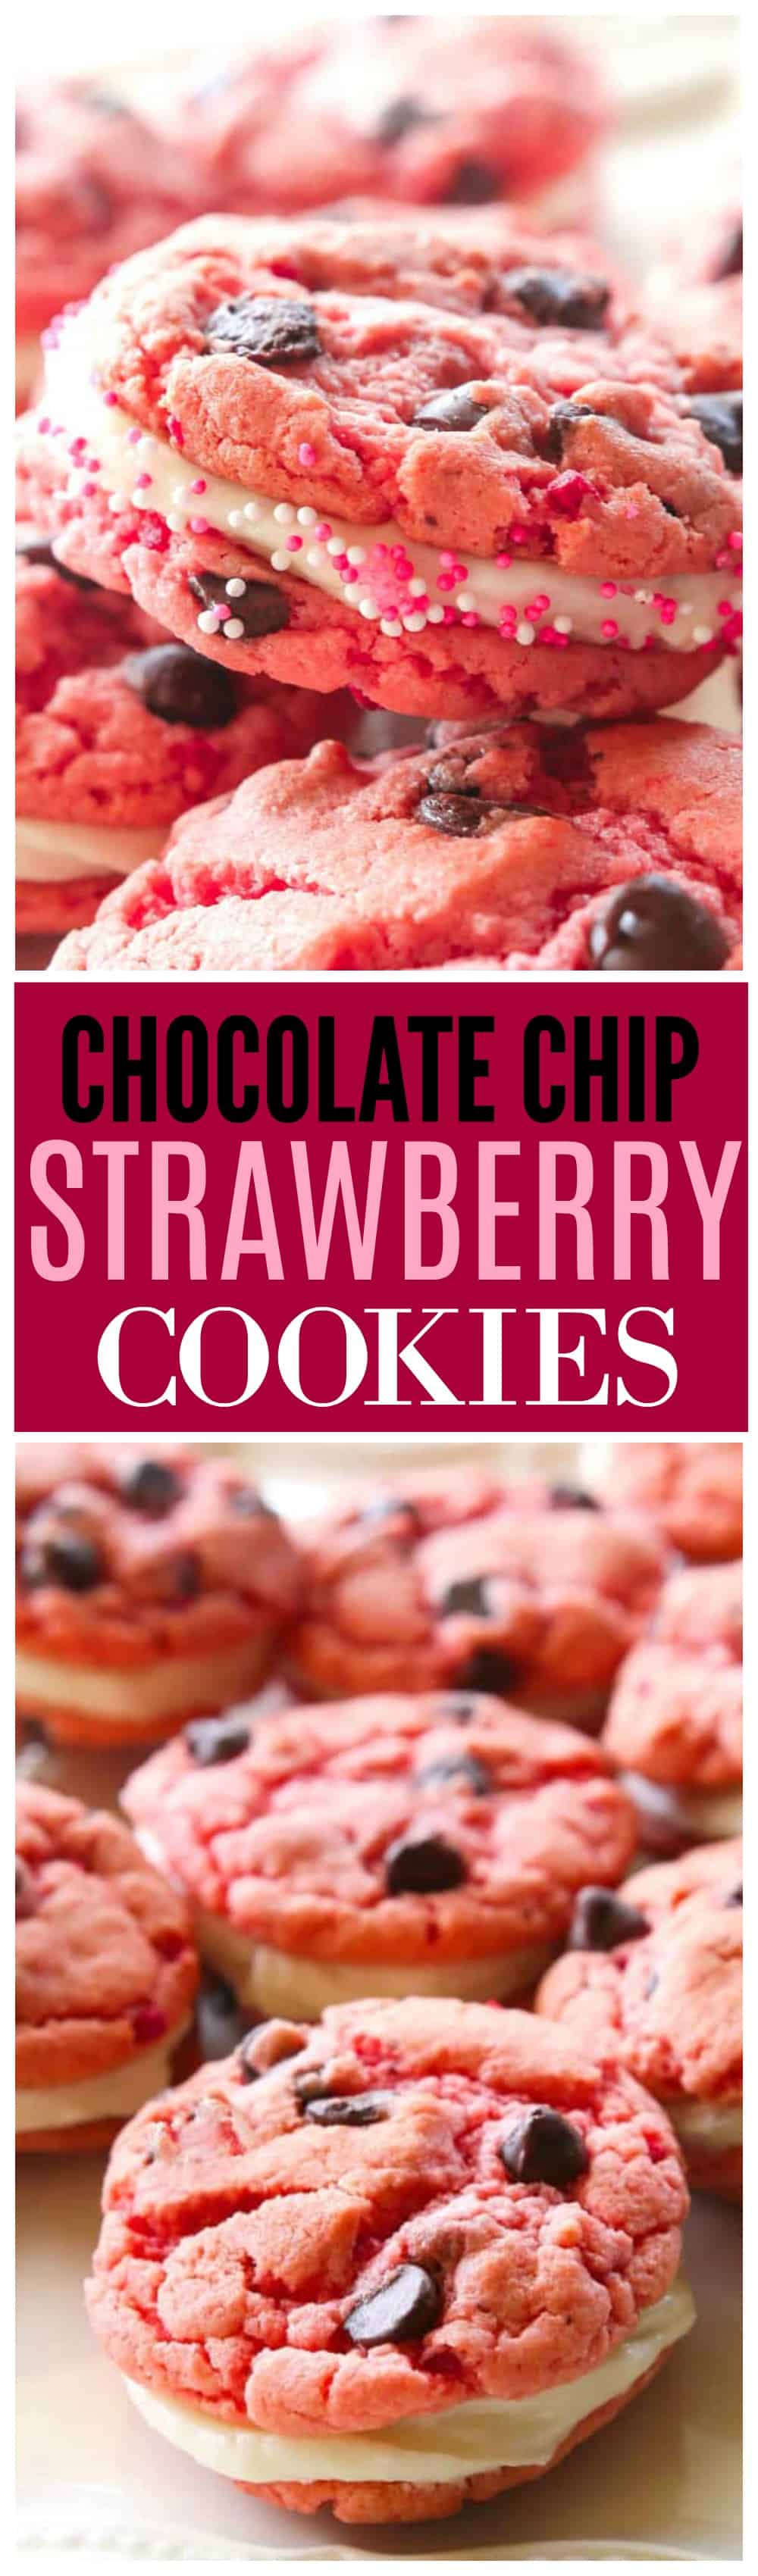 These Strawberry Chocolate Chip Oreos have a bright strawberry flavor with dots of chocolate throughout that are reminiscent of a chocolate covered strawberry. The center is filled with a cream cheese frosting that makes these cookies a real treat. 